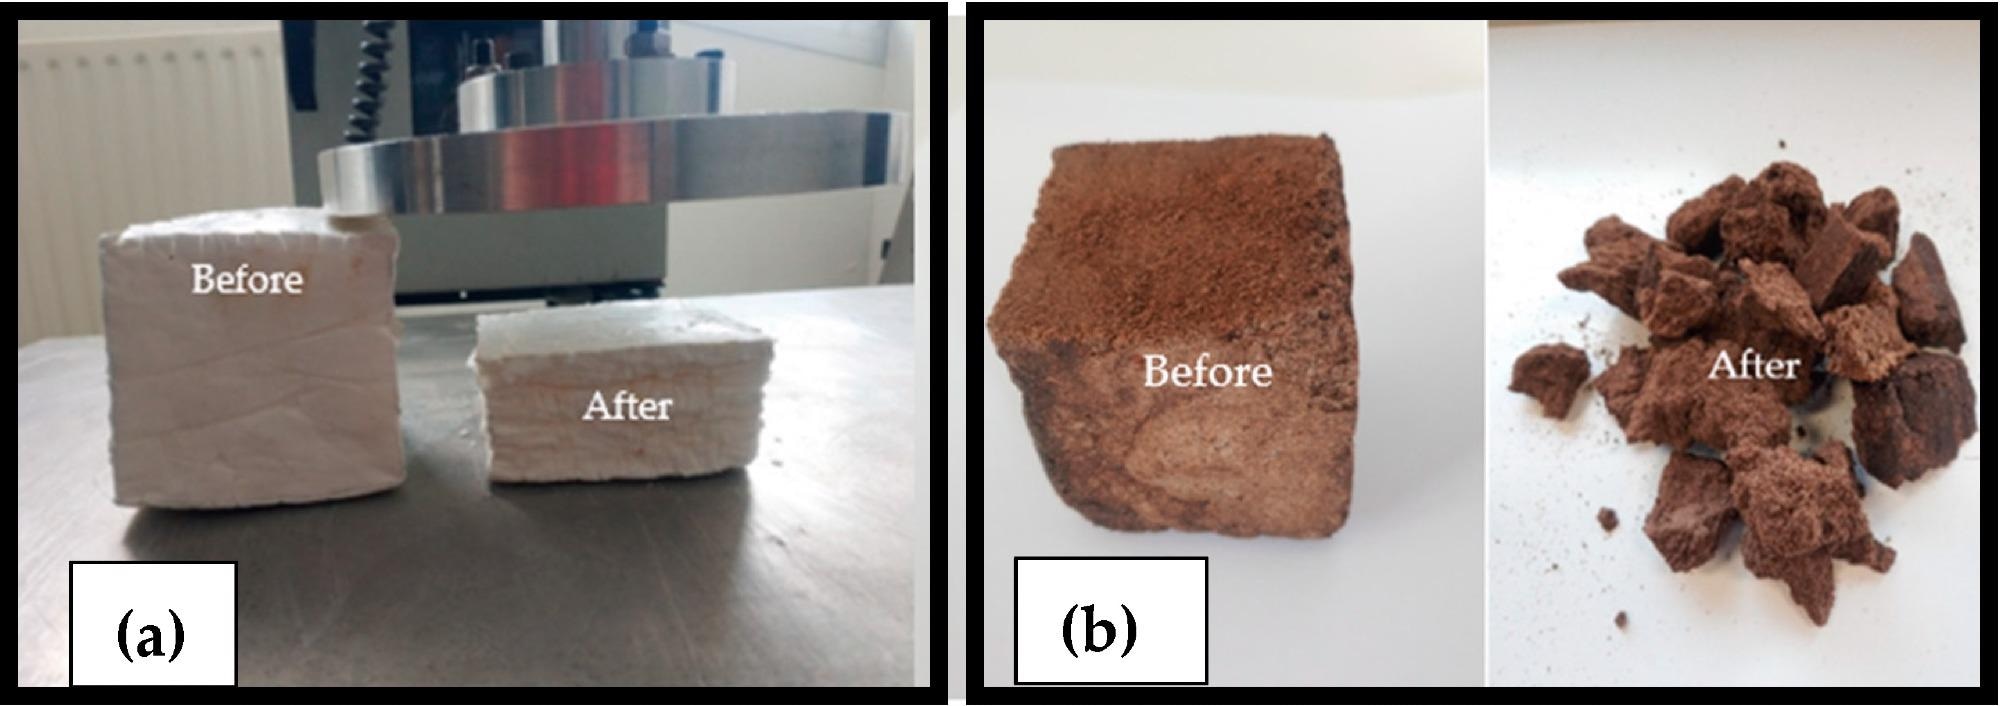 Cube-shaped SSCC-100 (a) and SSCC-40 (b) features before and after the compressive test.